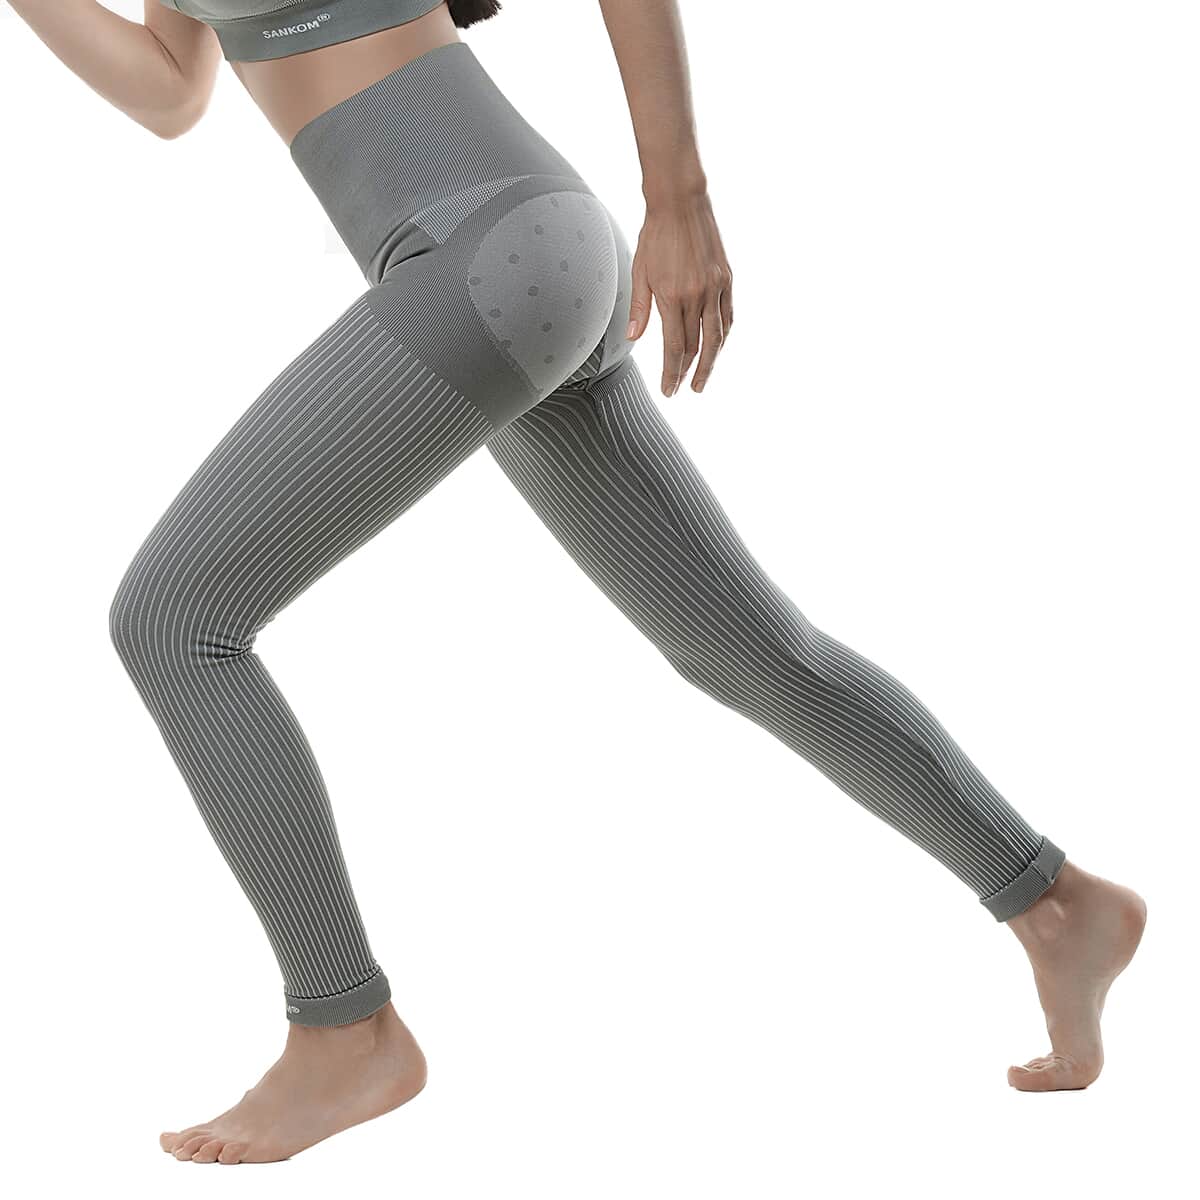 SANKOM Patent Gray Posture And Shaper Leggings For Women With Bamboo Fibers - M/L image number 3